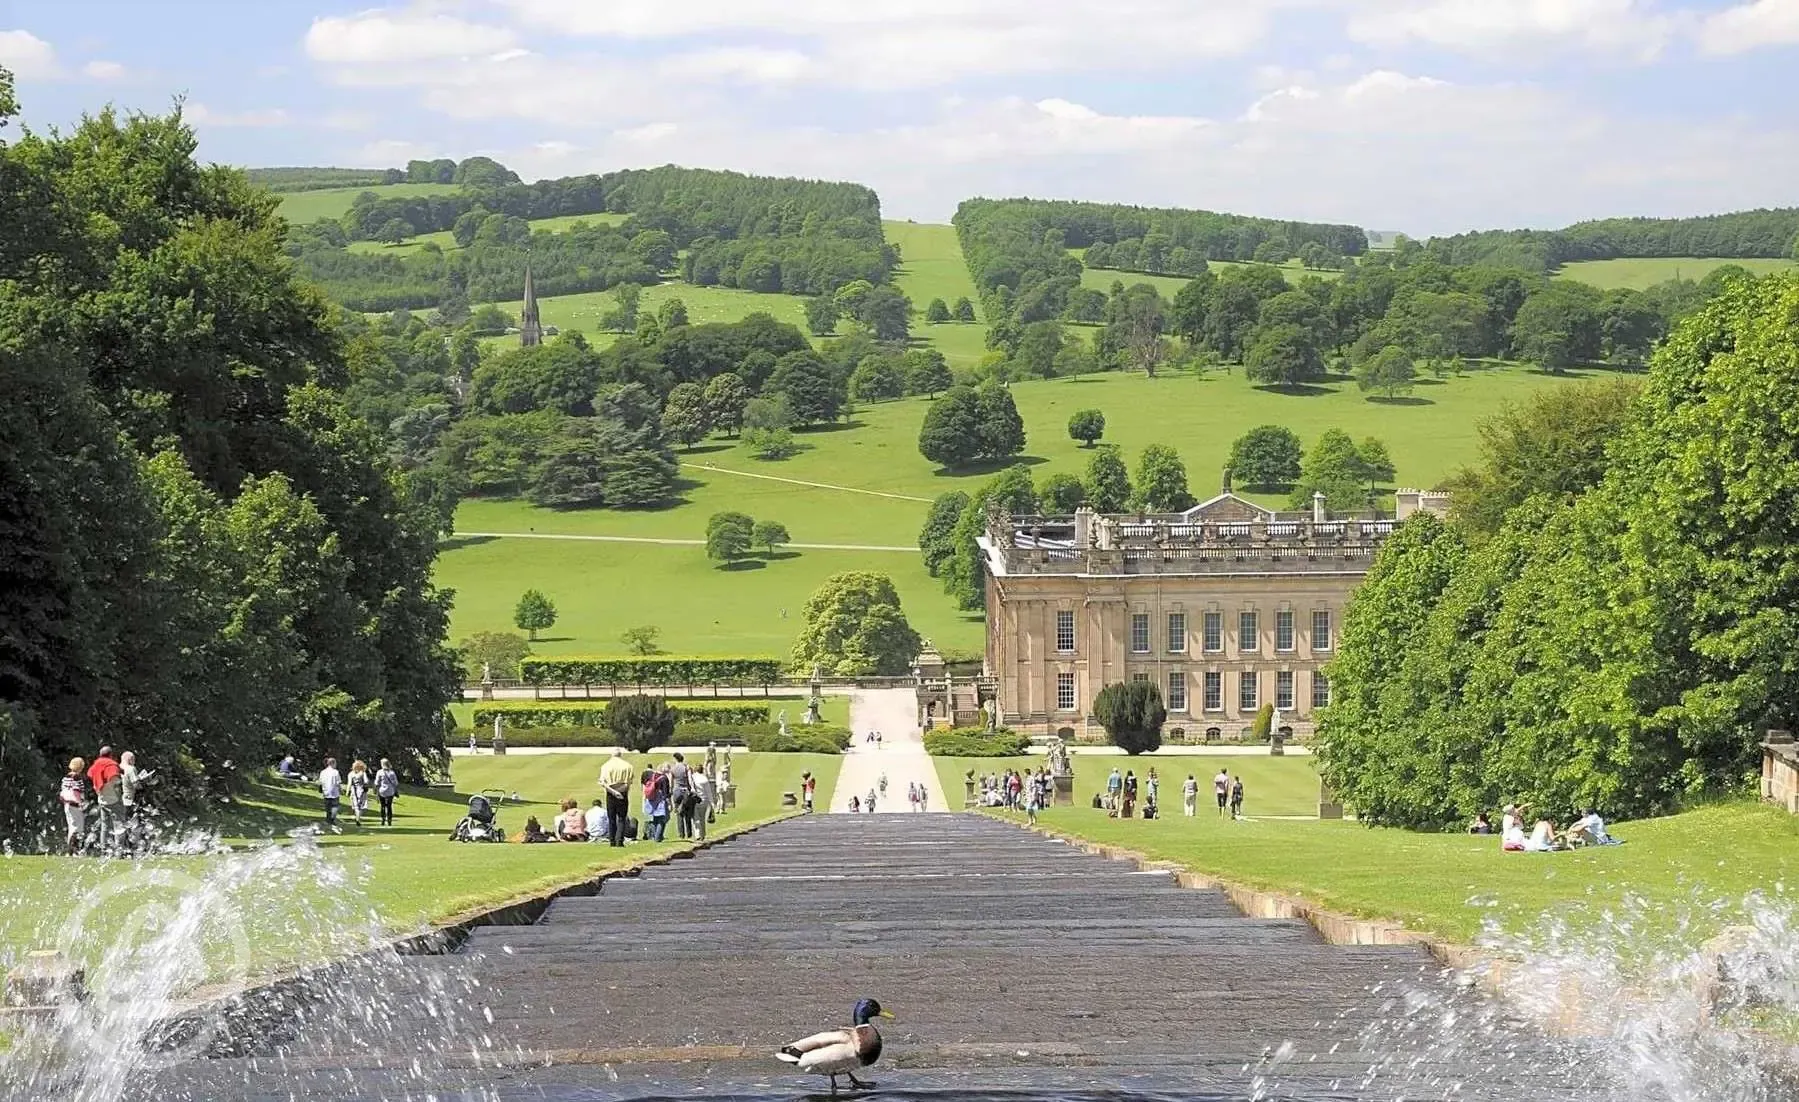 Nearby Chatsworth House